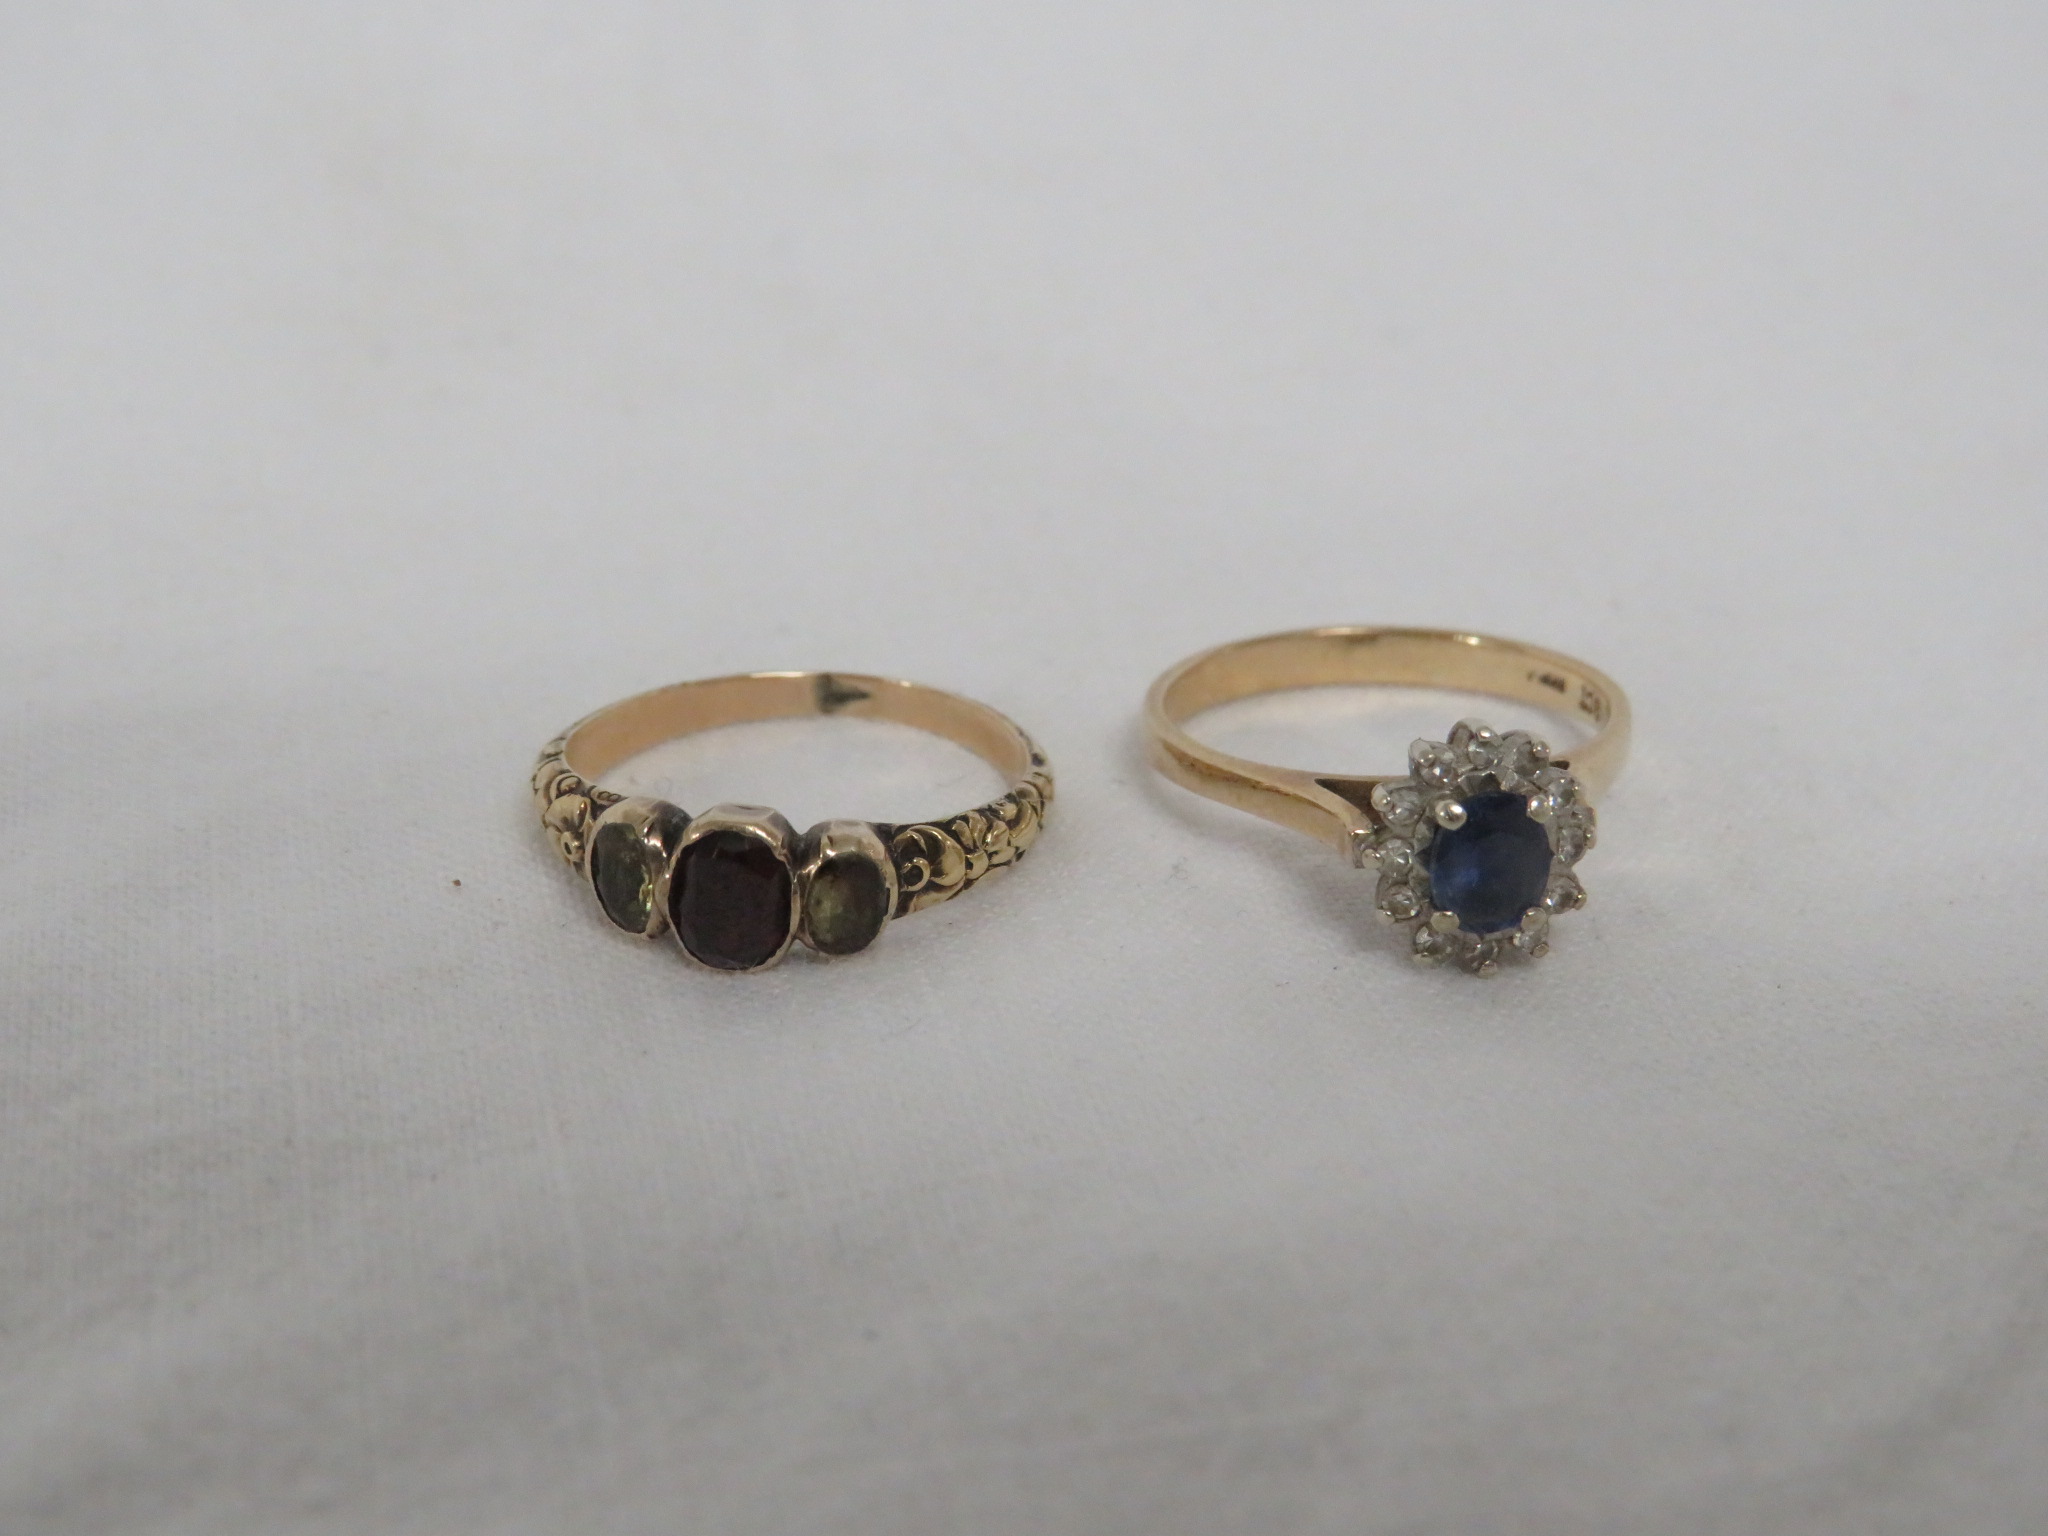 A DRESS RING SET WITH A SMALL SAPPHIRE (ABOUT 4.5MM X 3MM) SURROUNDED BY TWELVE VERY SMALL DIAMONDS, - Image 2 of 2